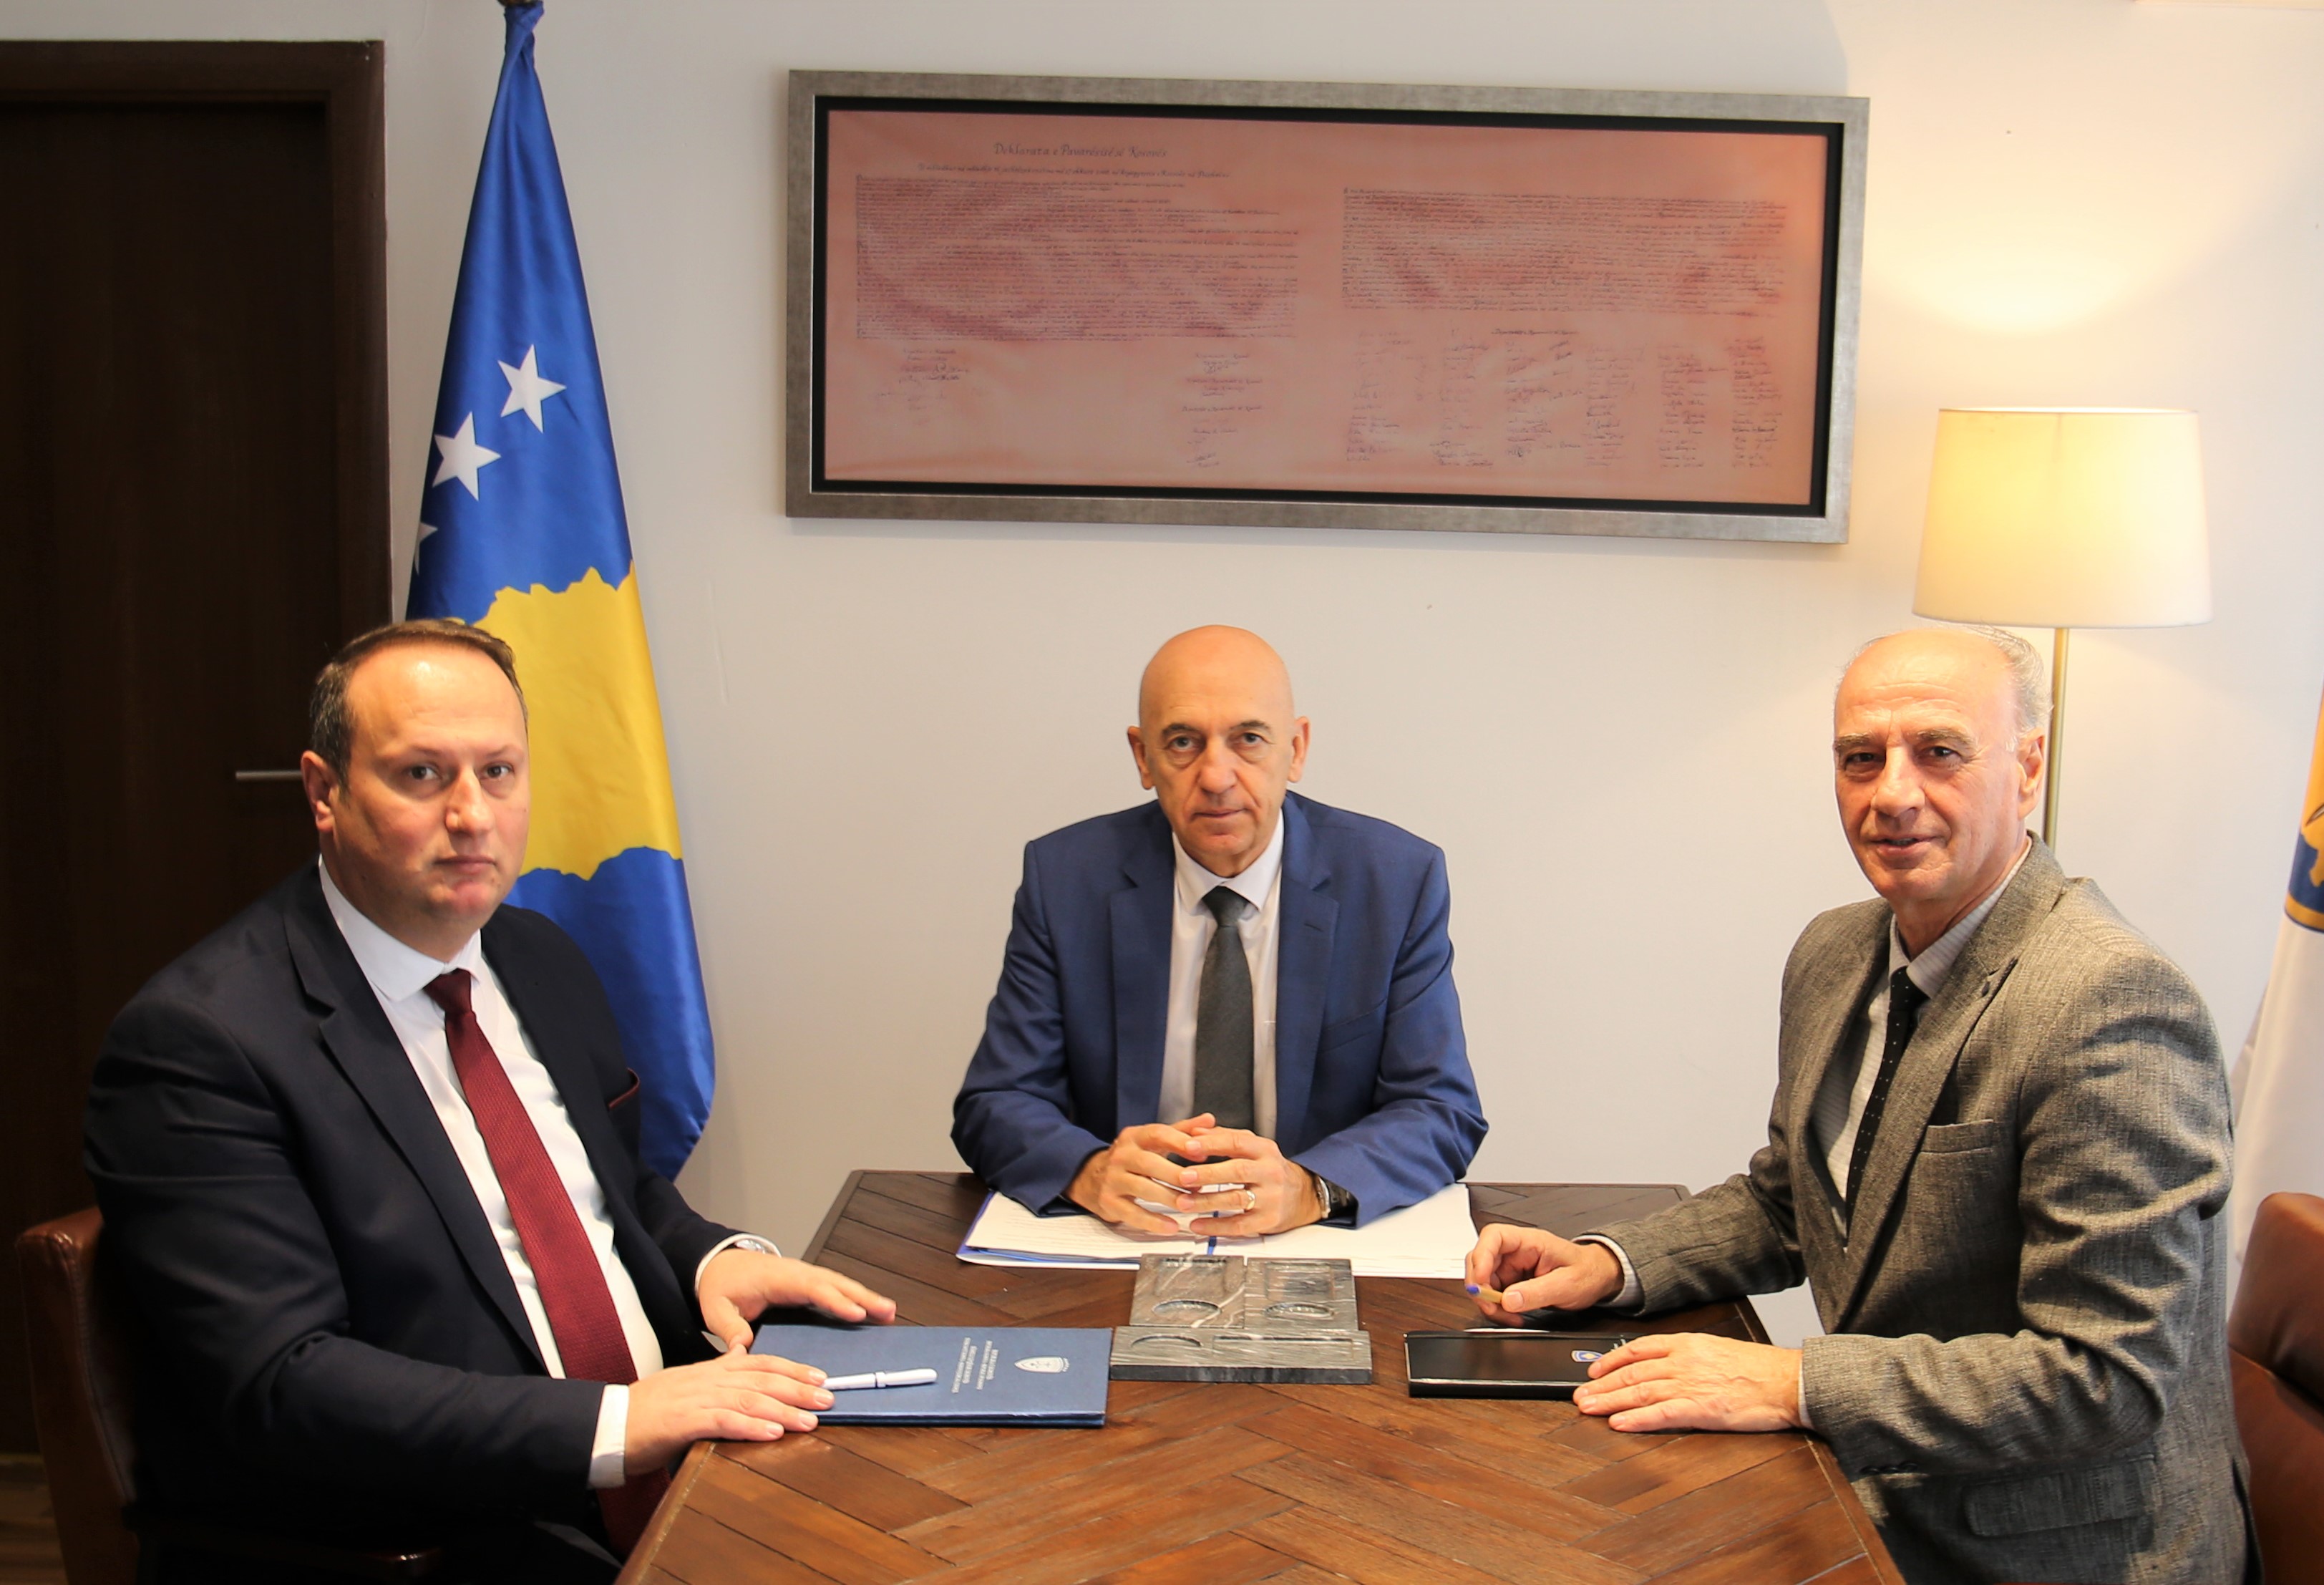 The leaders of the institutions of the judicial and prosecutorial system meet